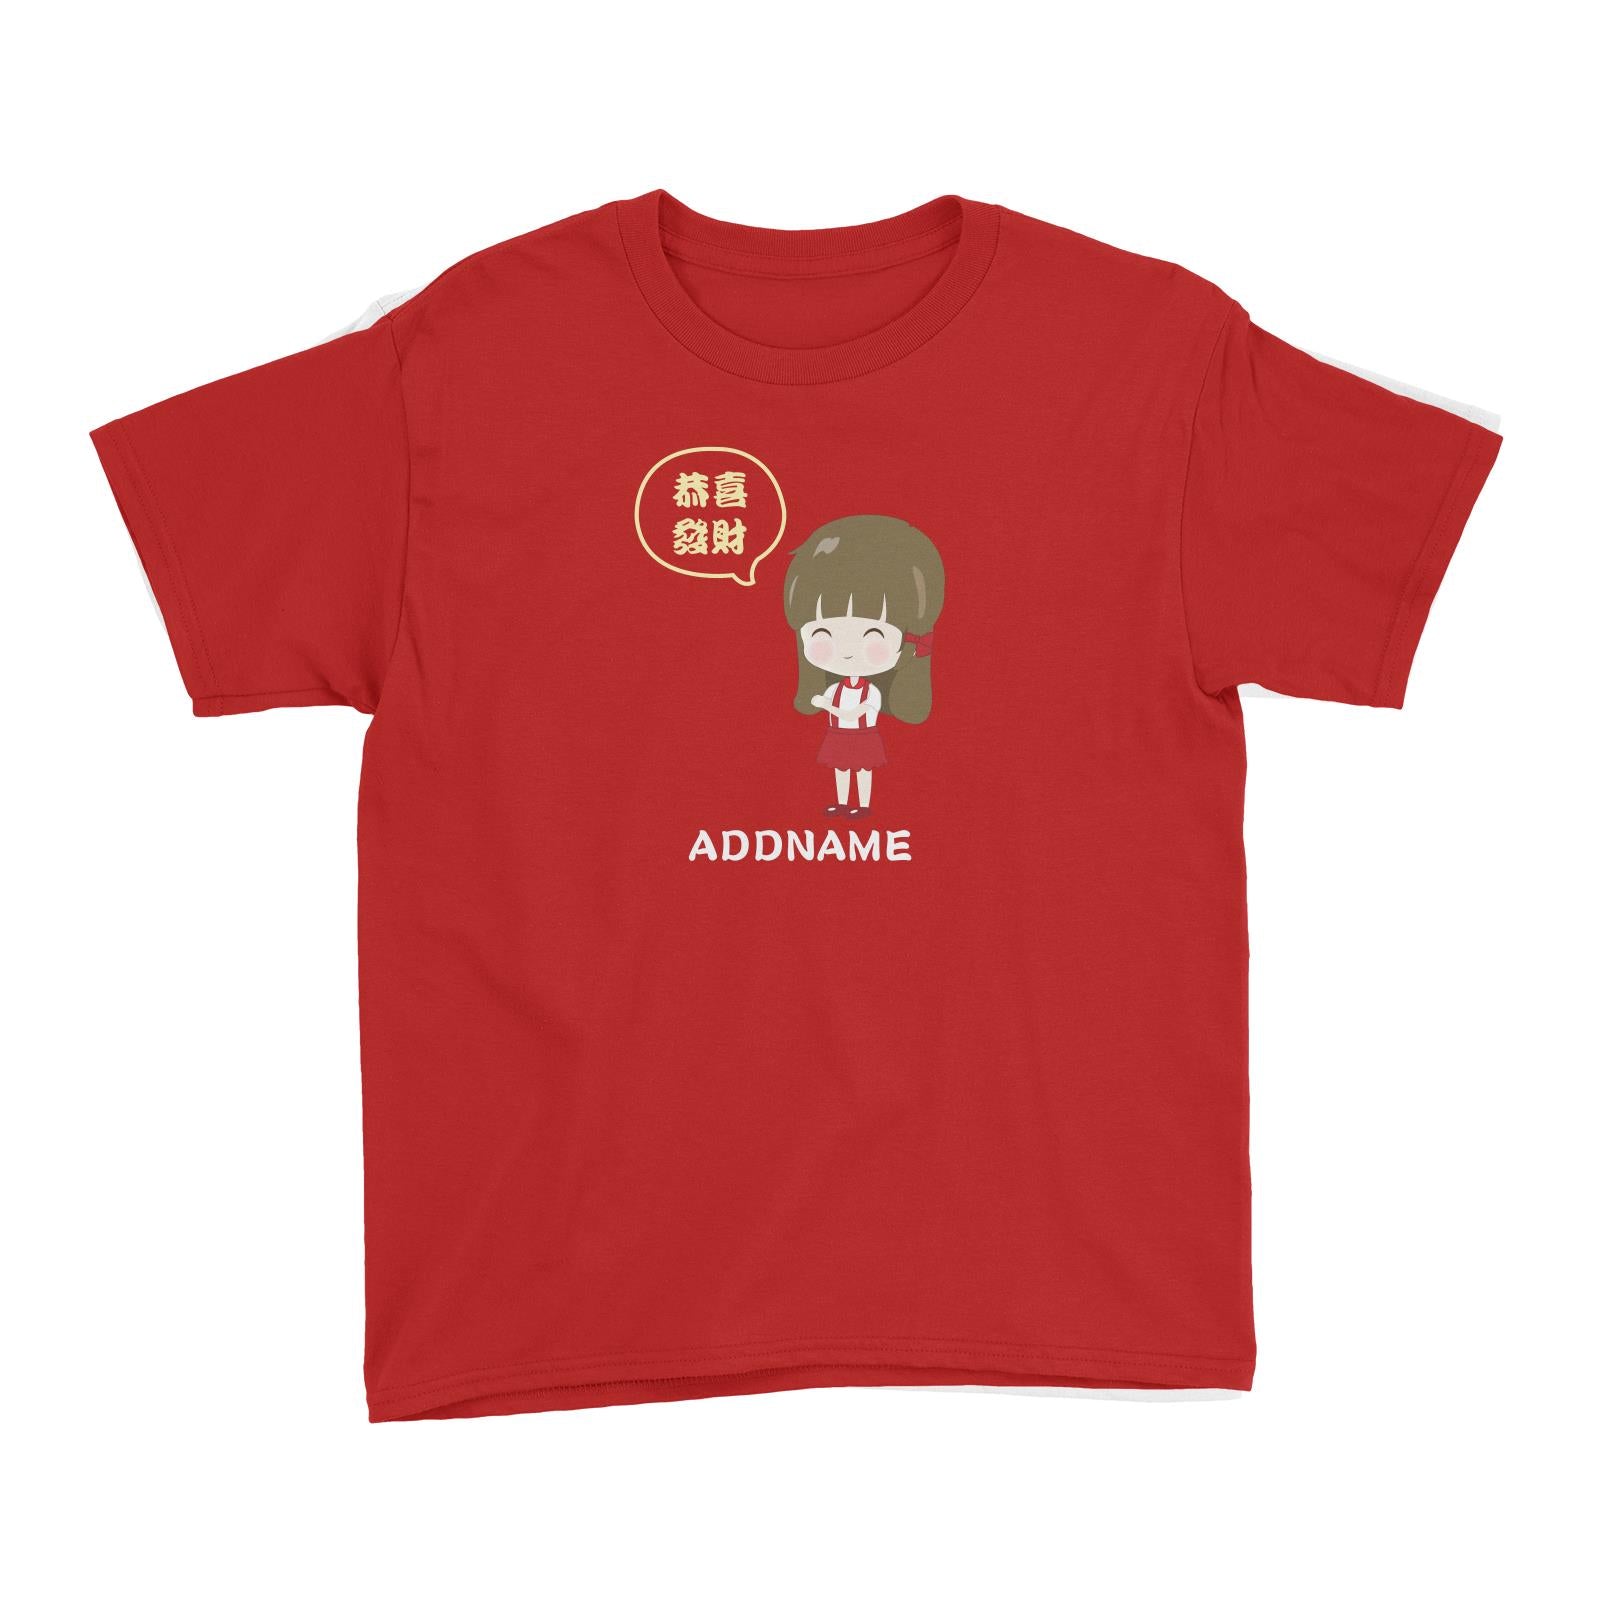 Chinese New Year Family Gong Xi Fai Cai Girl Addname Kid's T-Shirt